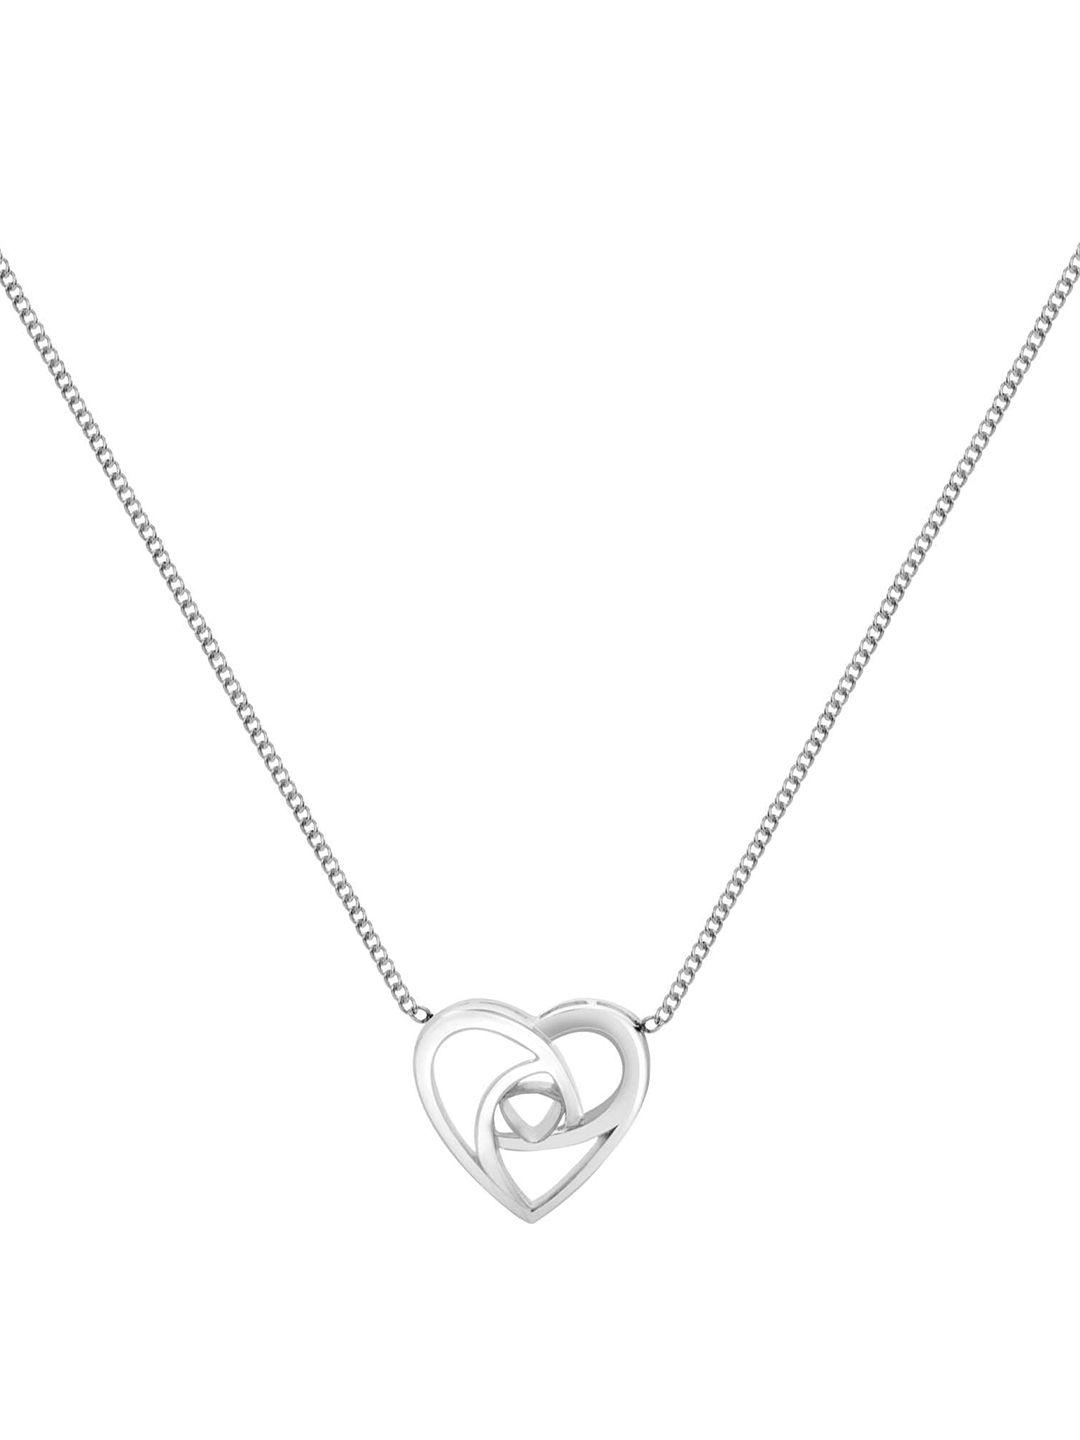 kicky-and-perky-925-sterling-silver-plated-&-heart-shape-pendant-with-chain